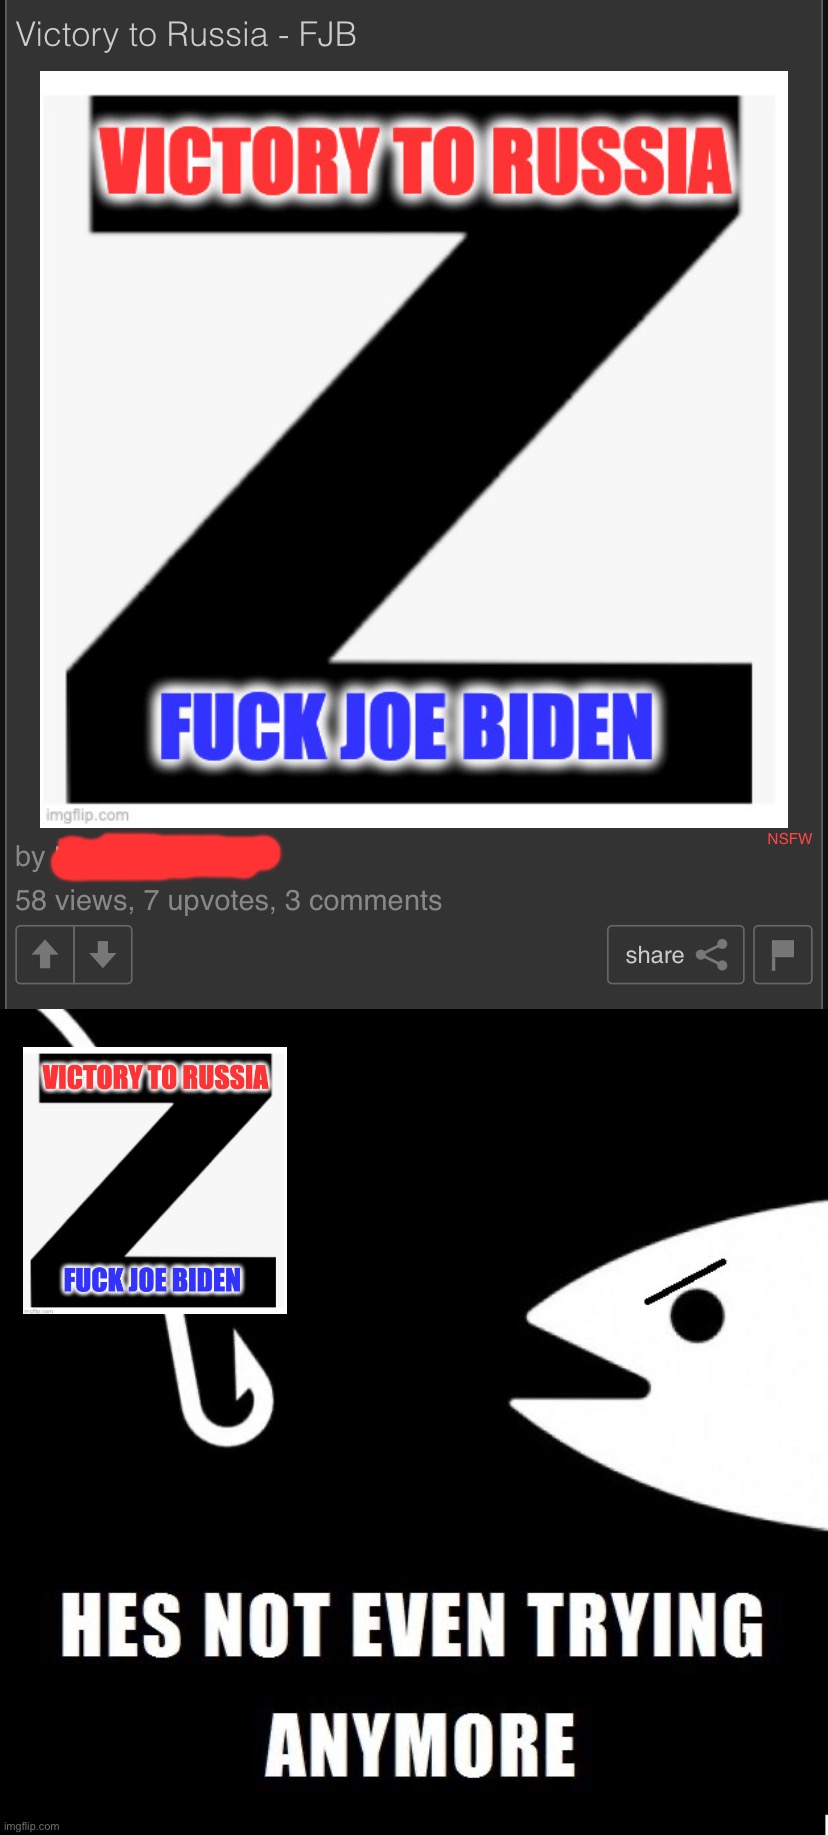 They’re not even trying to hide the nexus between Biden-hating and Russia-loving anymore | image tagged in not bait he s not even trying anymore,biden haters,putin lovers,same,people,change my mind | made w/ Imgflip meme maker